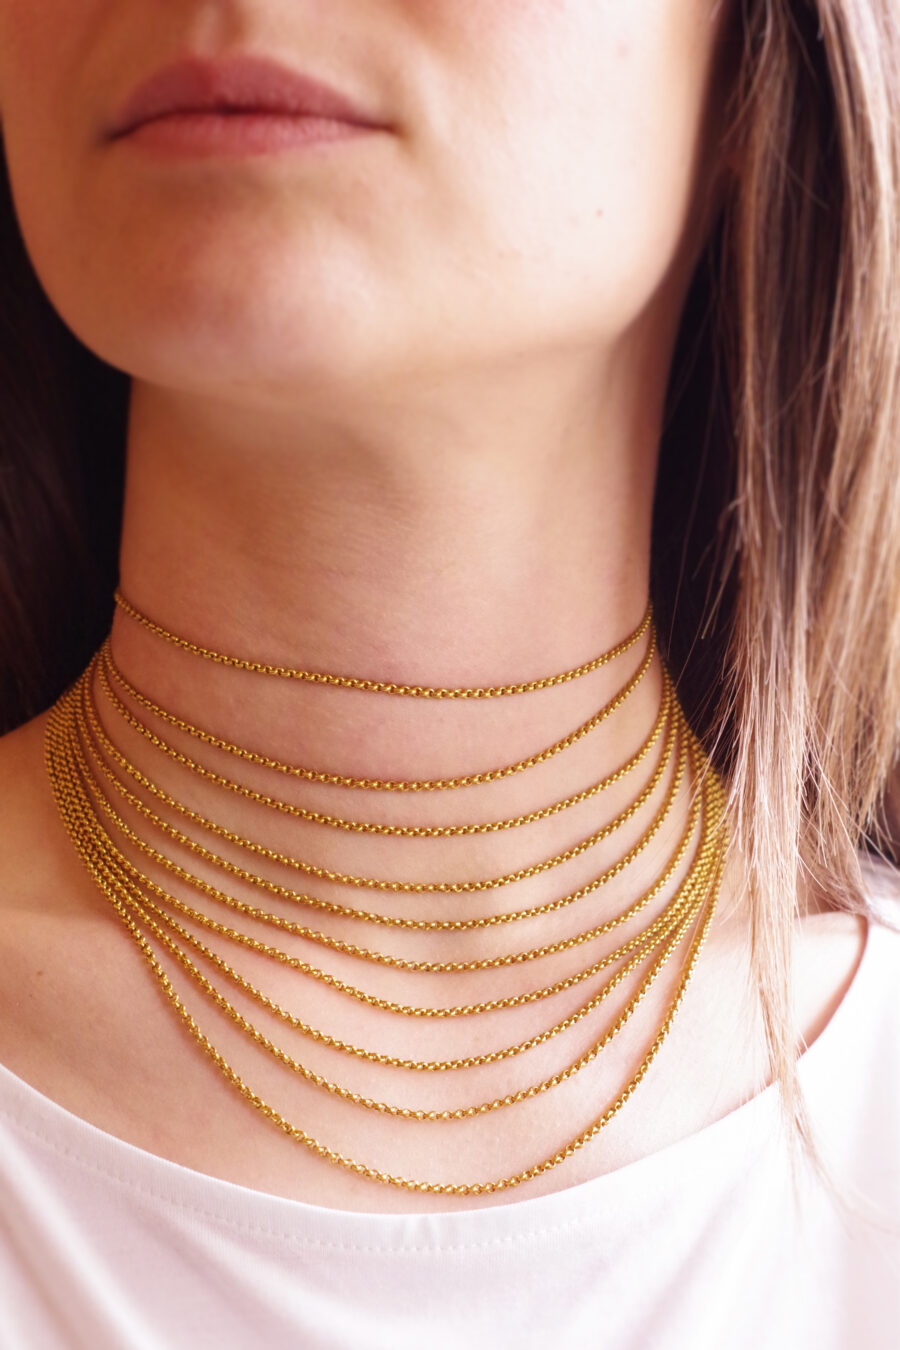 Victorian gold choker necklace